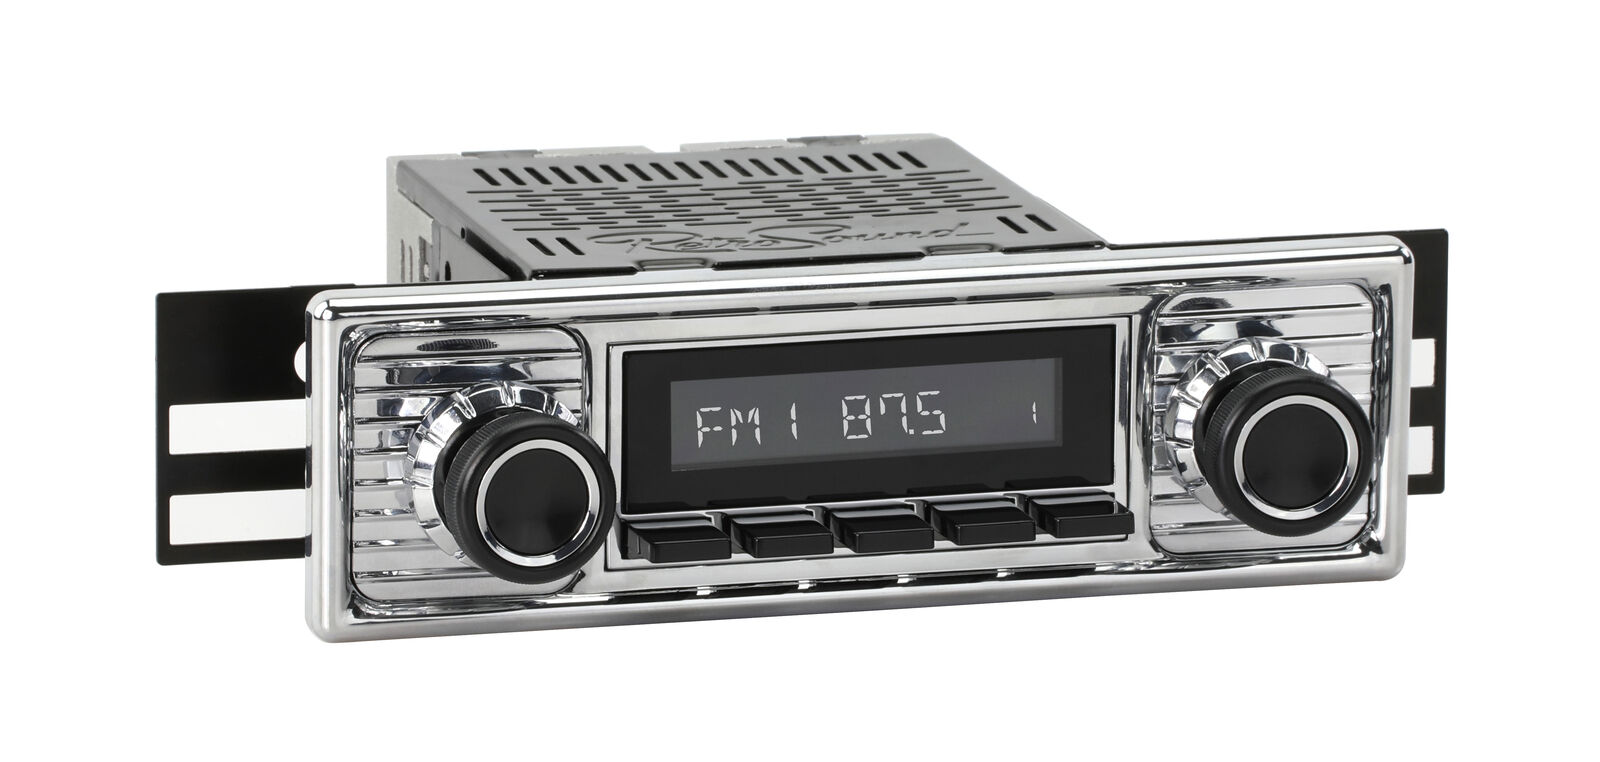 RetroRadio for 1955-65 Mercedes-Benz 190 with Chrome Faceplate BT AUX AM/FM LACB